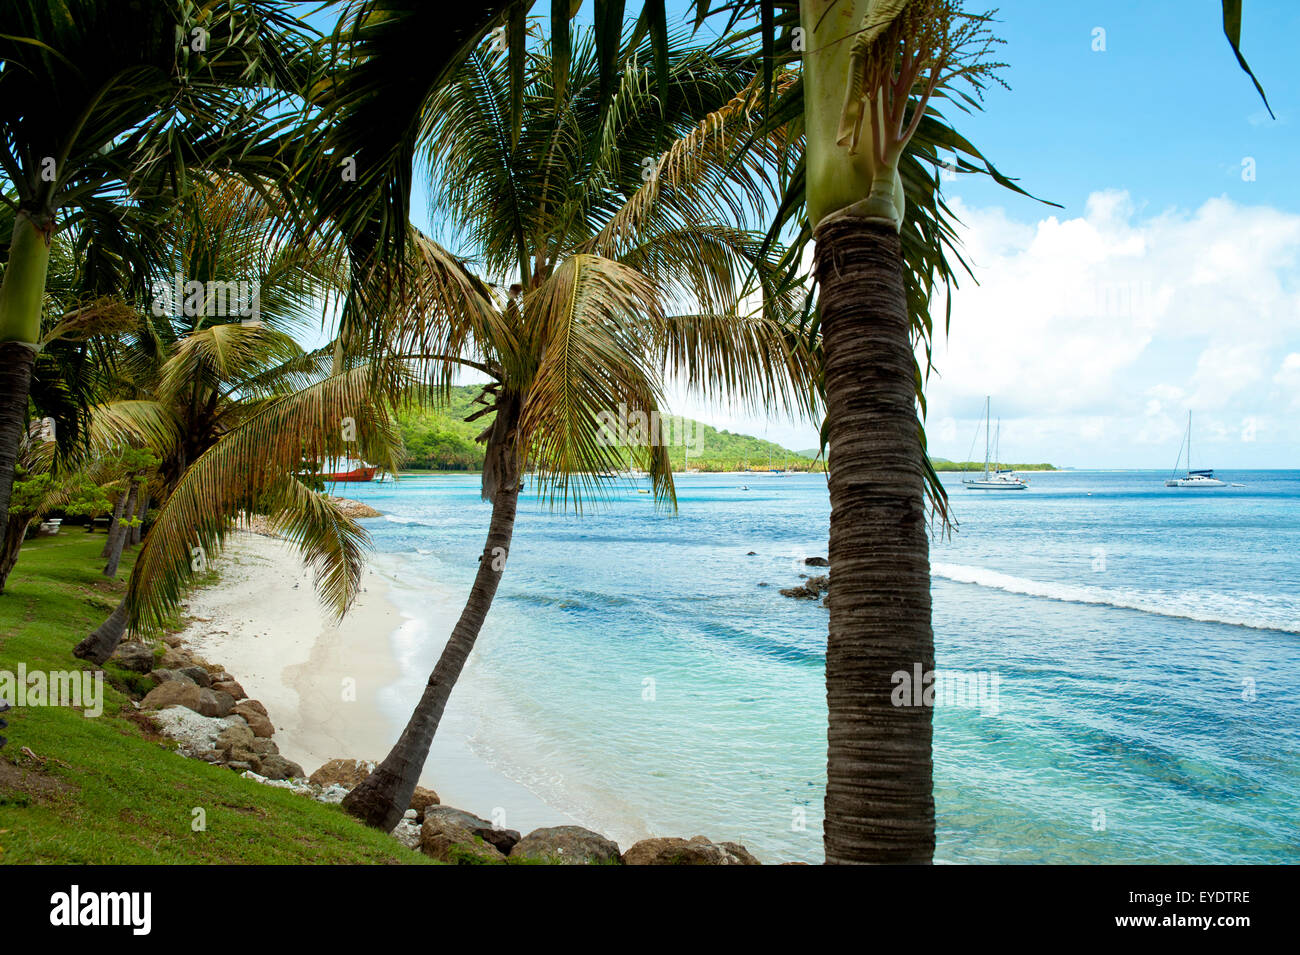 Beach In Mustique Island, St Vincent And The Grenadines, West Indies ...